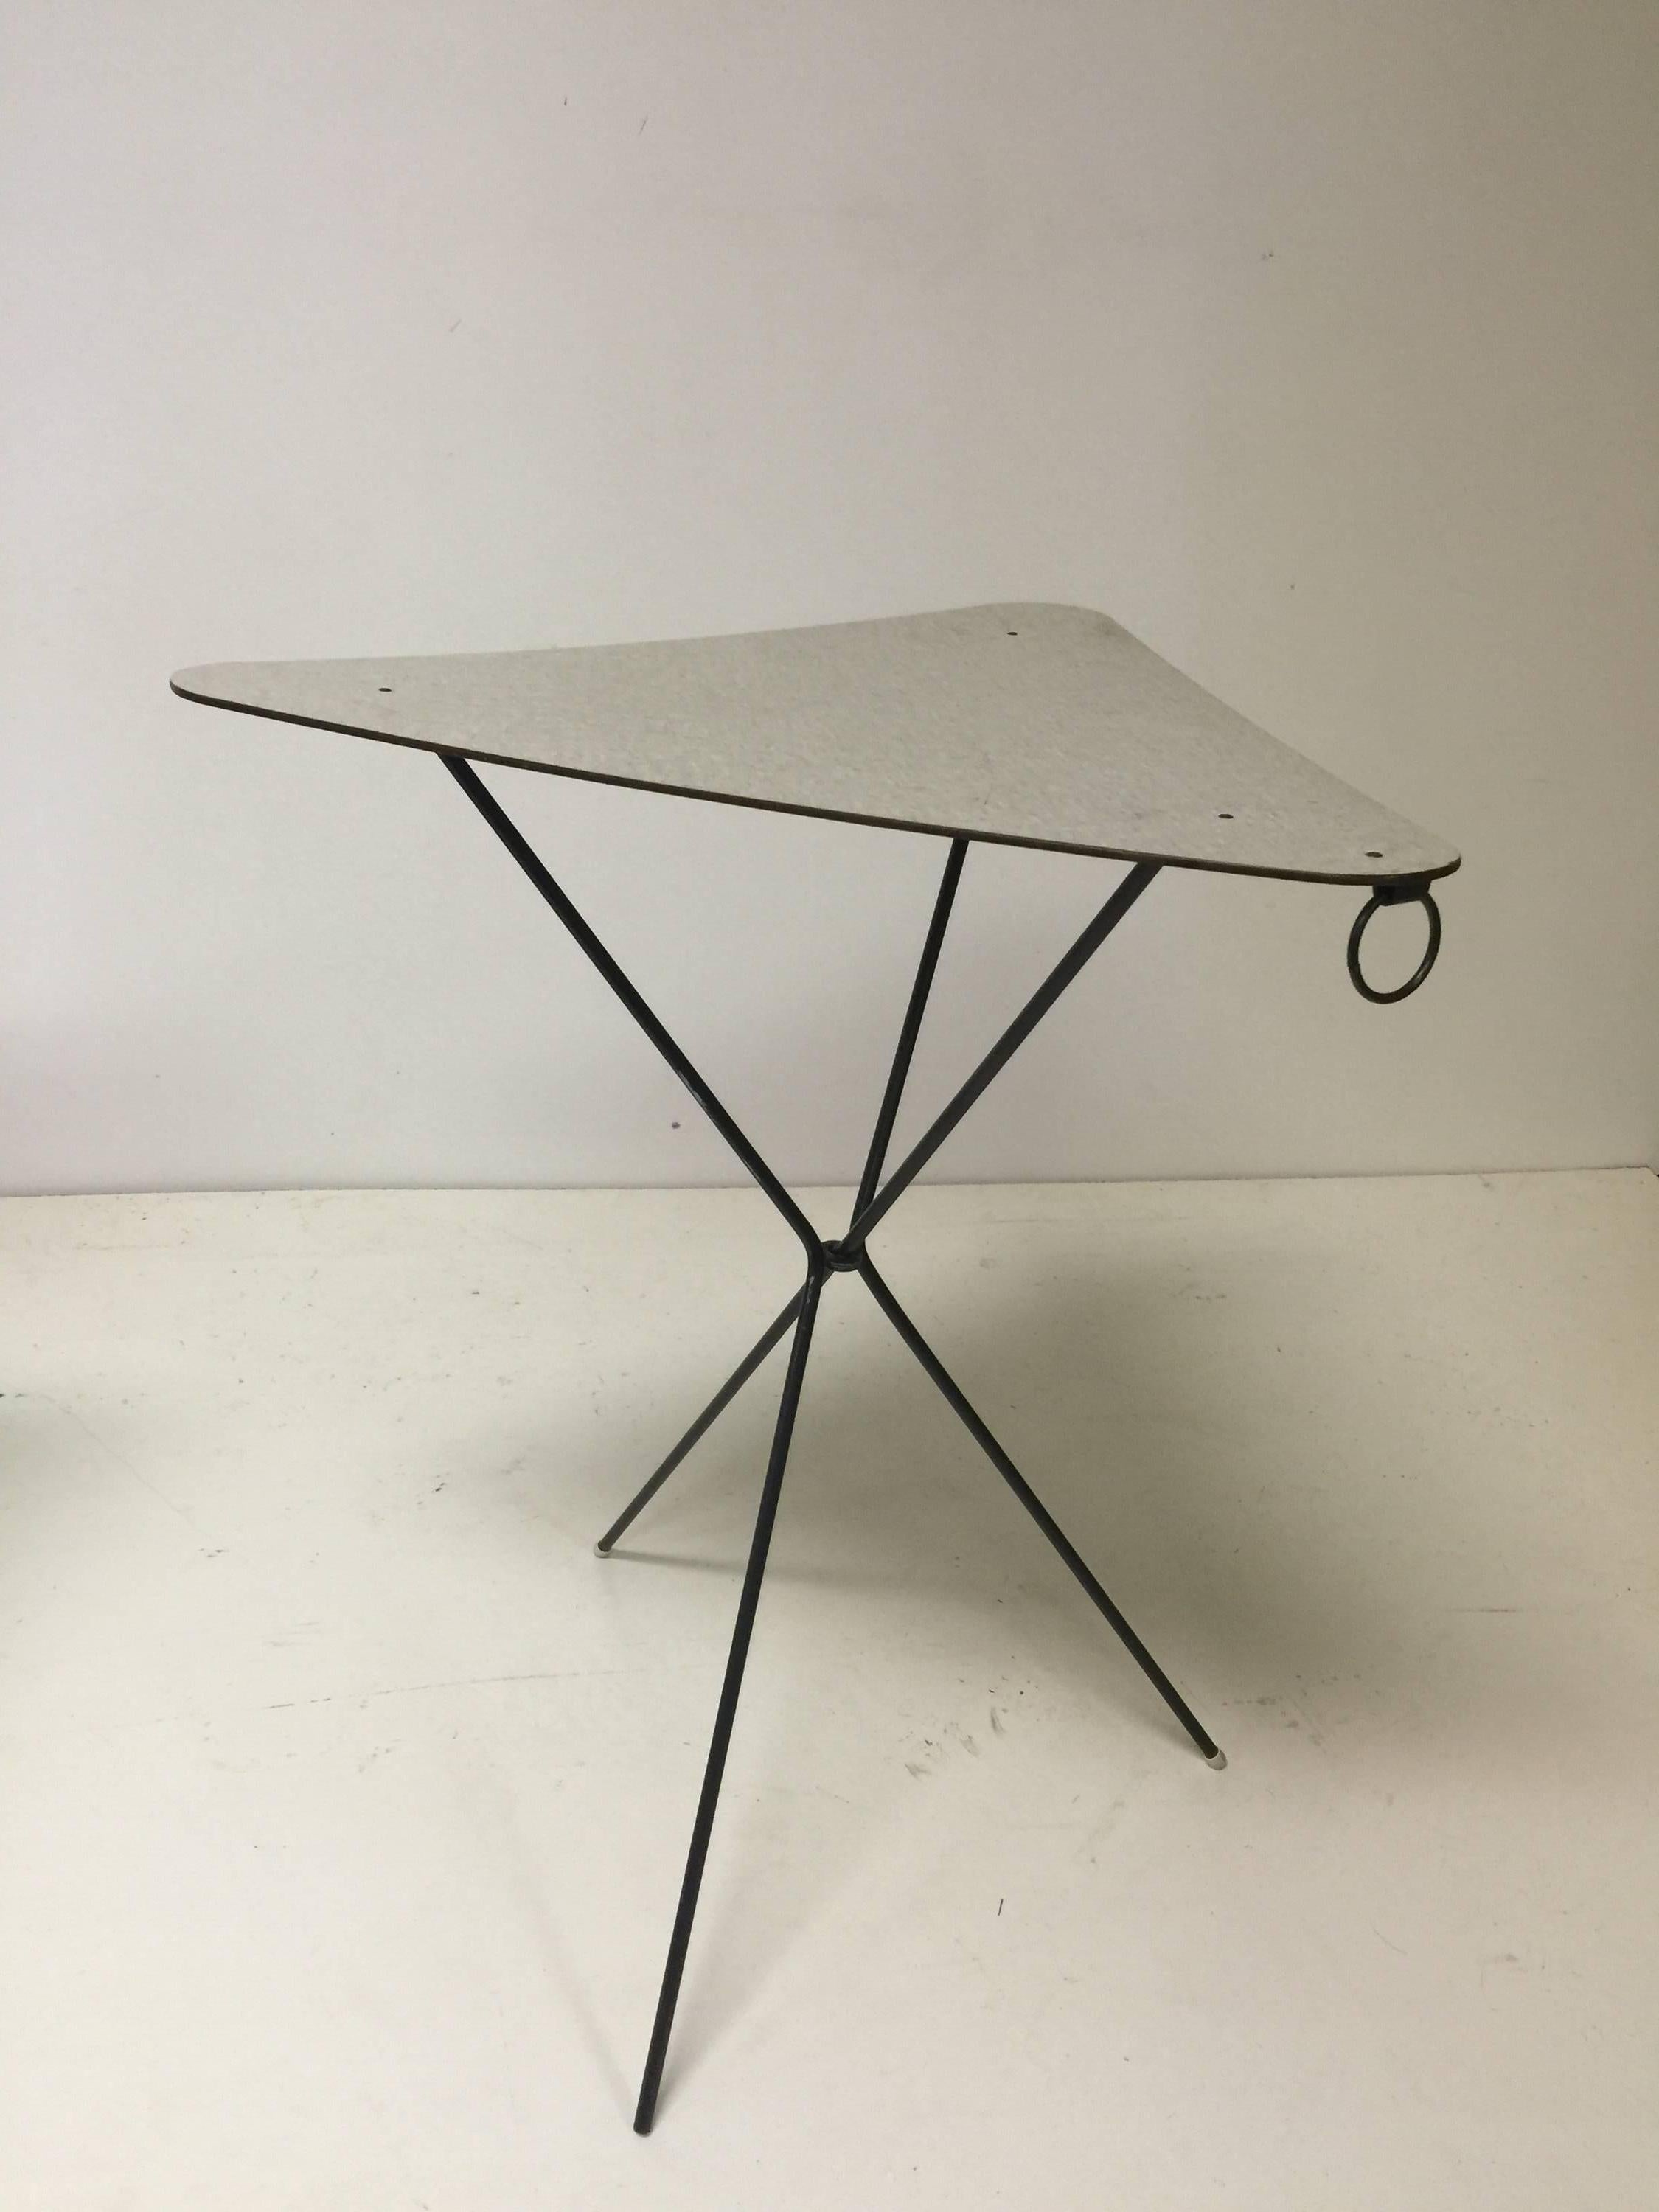 20th Century Pair of French Triangular Cocktail Tables by Mathieu Matégot, circa 1950s For Sale